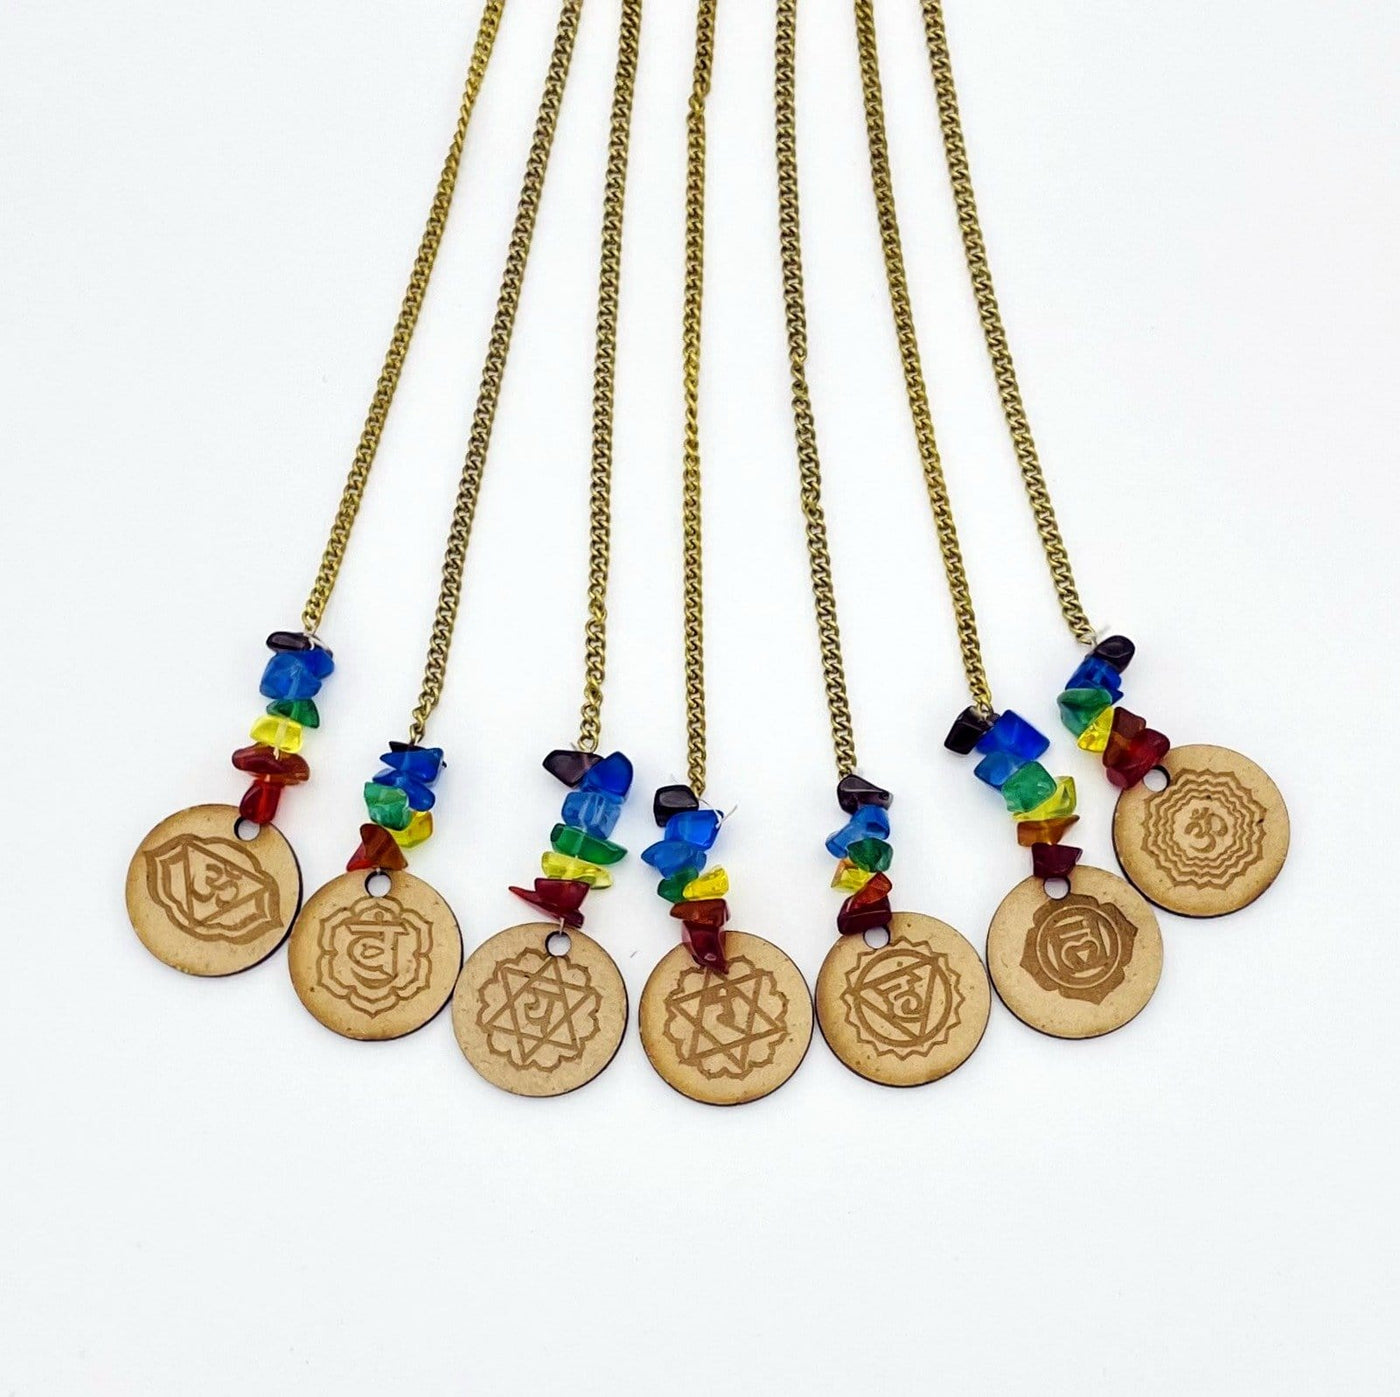 Mini engraved wood circles Each decorated with chakra colored tumbled glass accents on a white background.